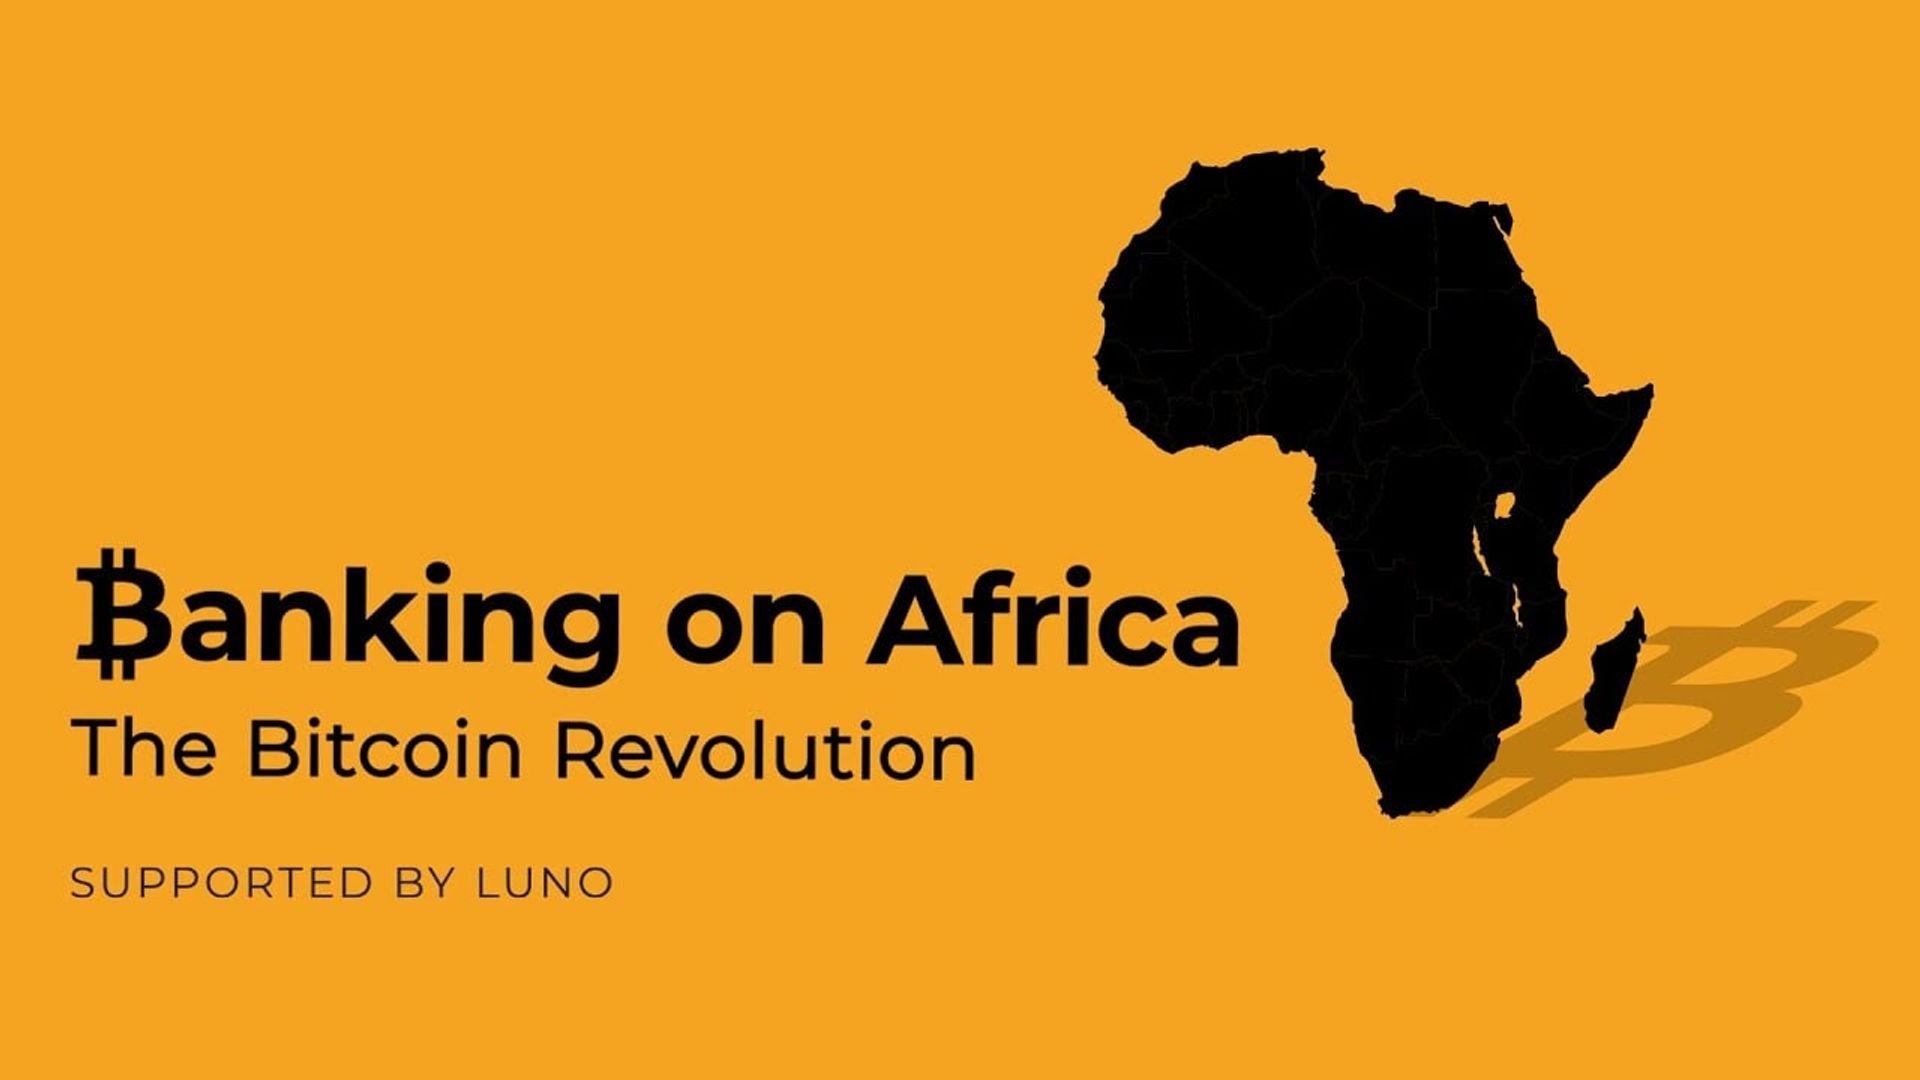 Banking on Africa: The Bitcoin Revolution background